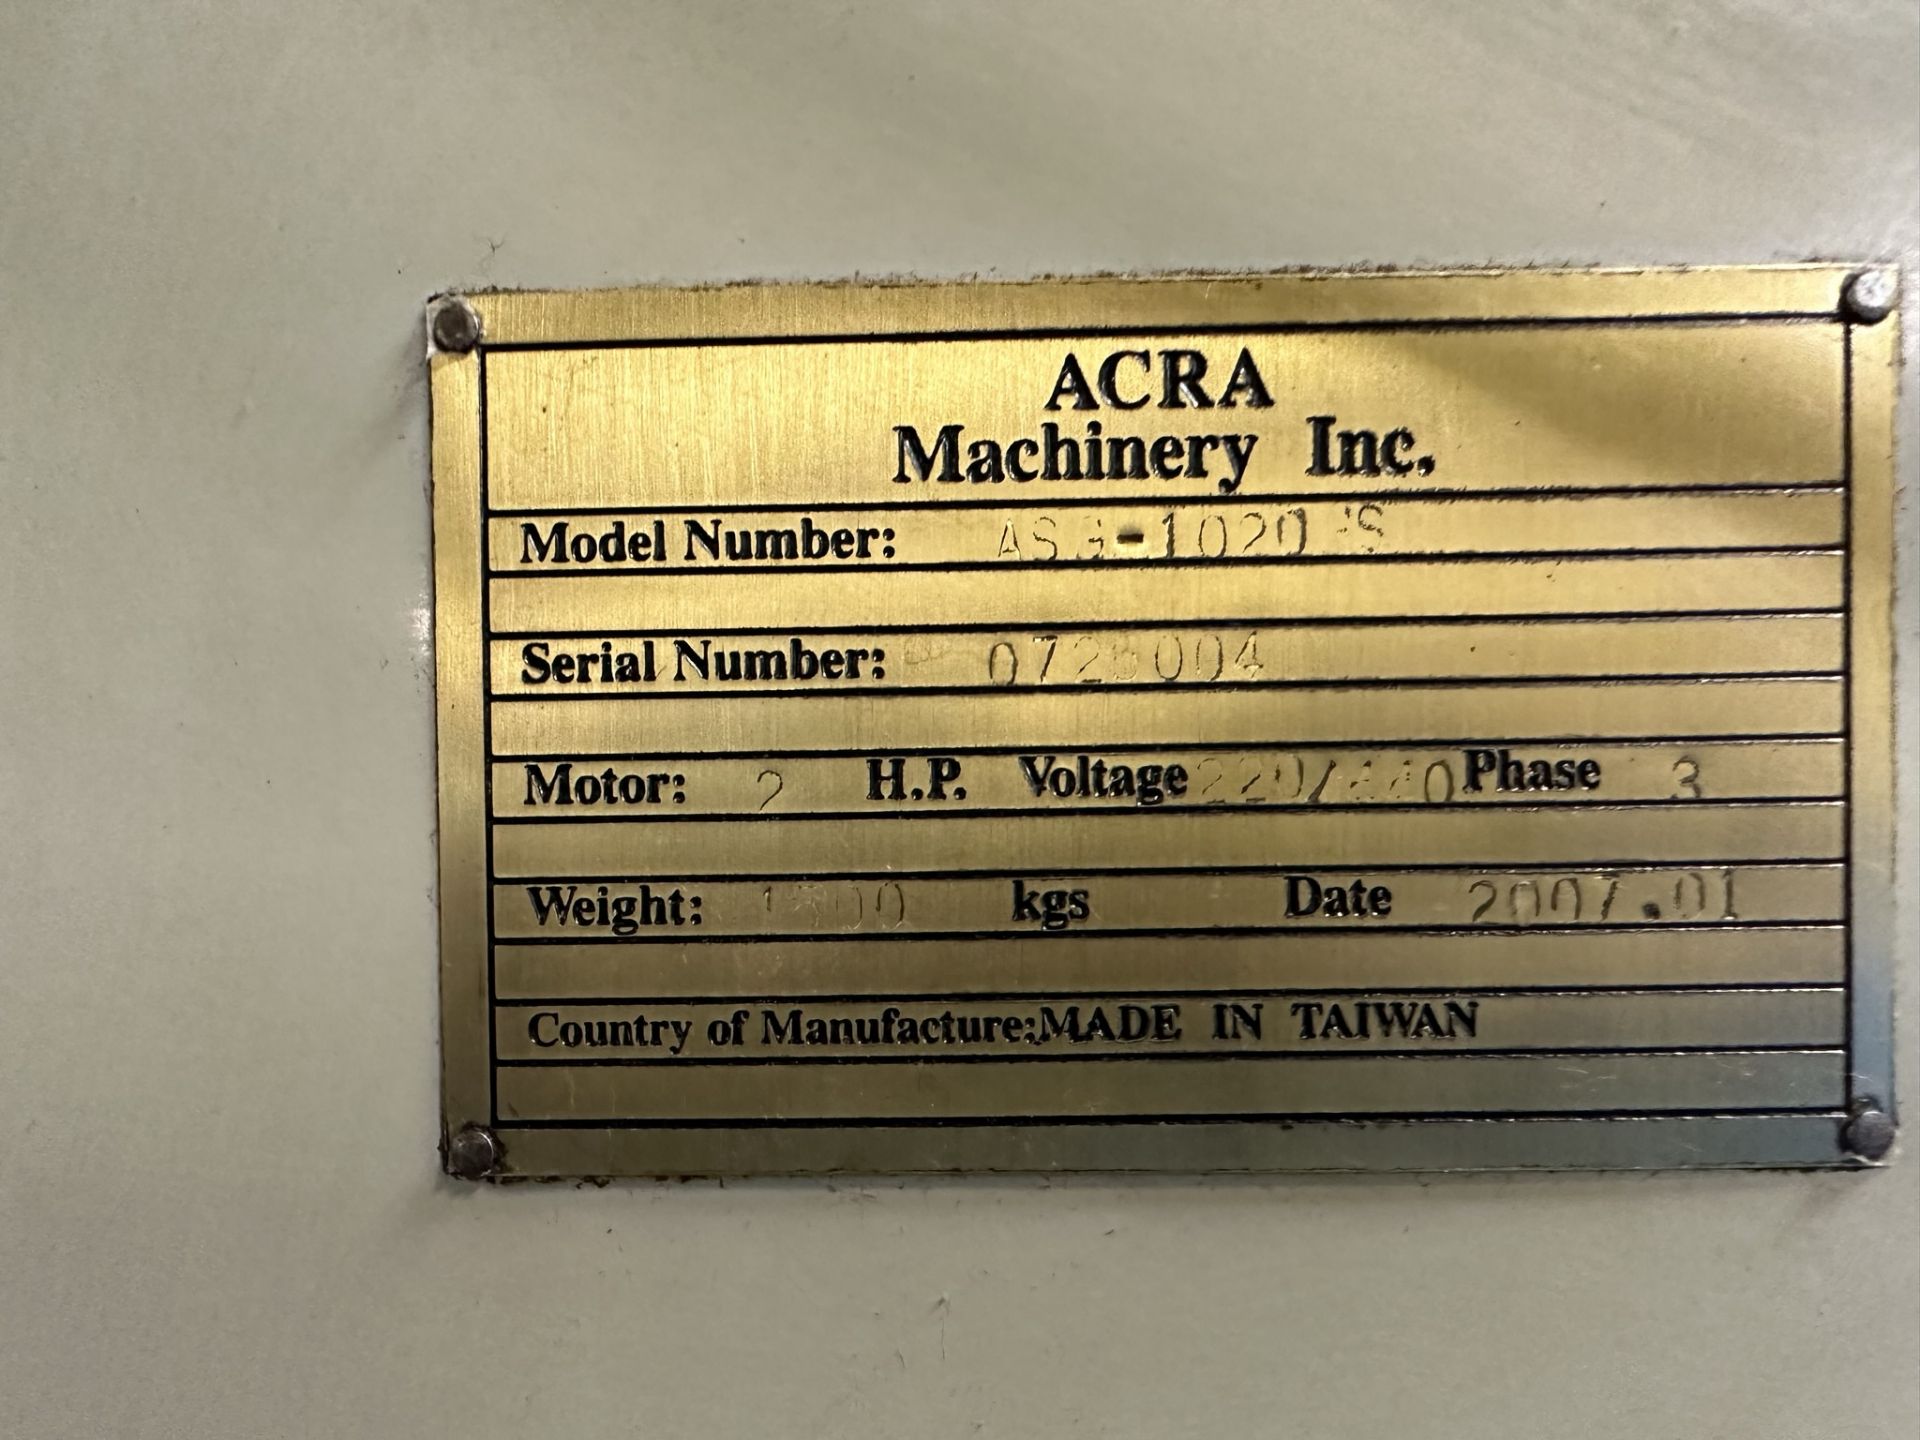 ACRA ASG-1020HS RECIPROCATING SURFACE GRINDER, S/N 0725004 - Image 6 of 7